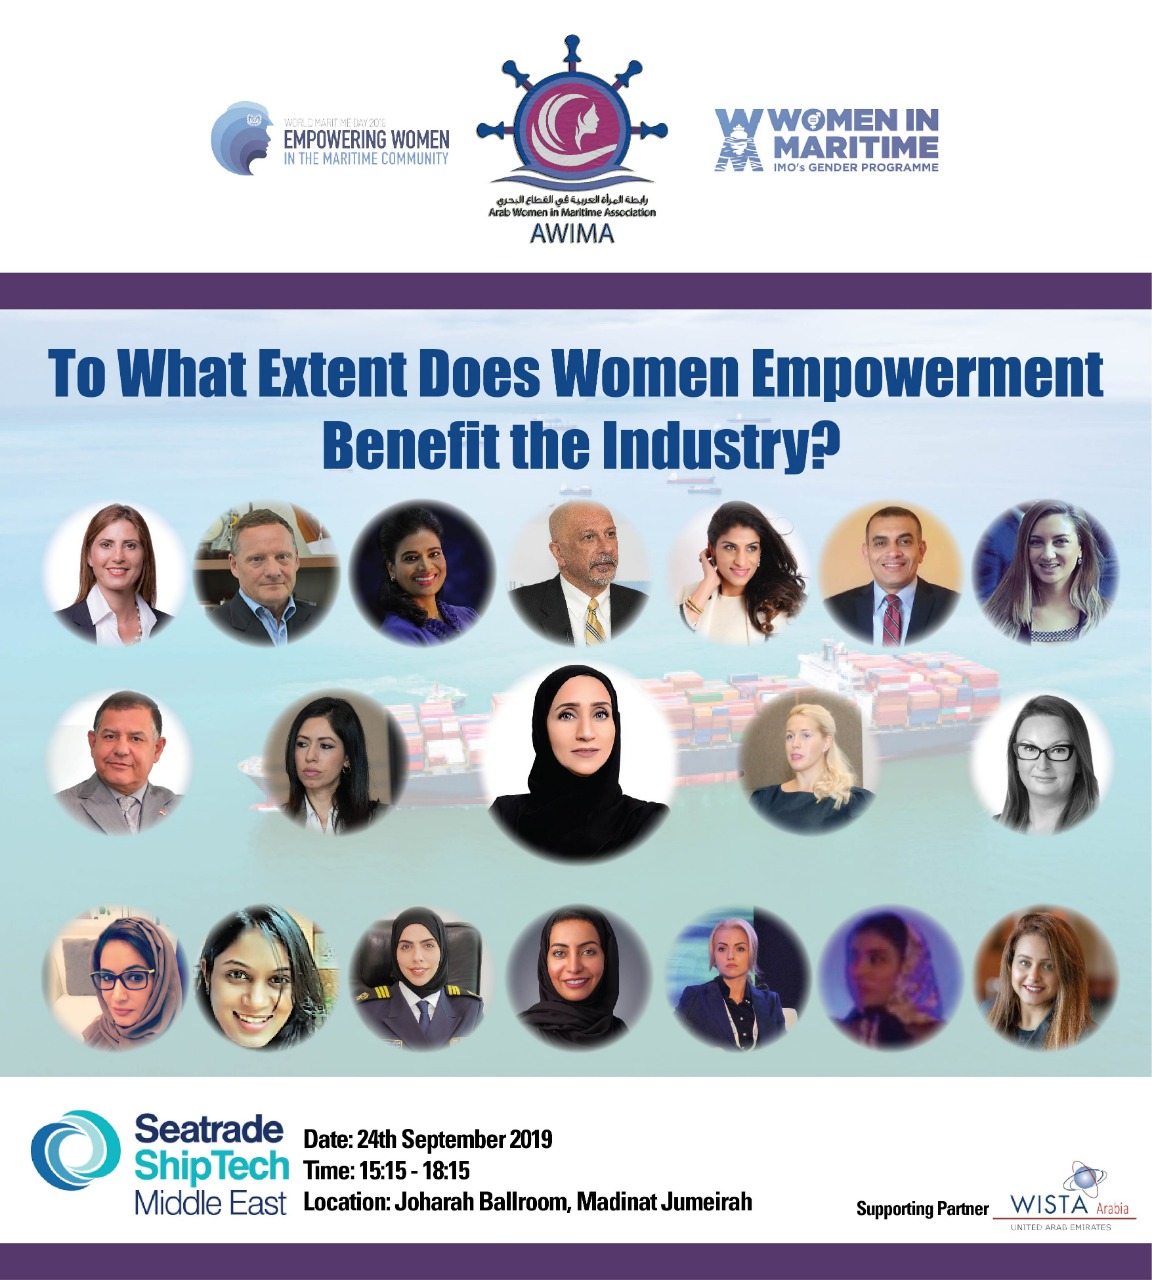 Arab AWIMA is proud to annouce being the “Women Empowerment” Partner to the Seatrade Shiptech 2019 as part of the UAE Maritime Week.